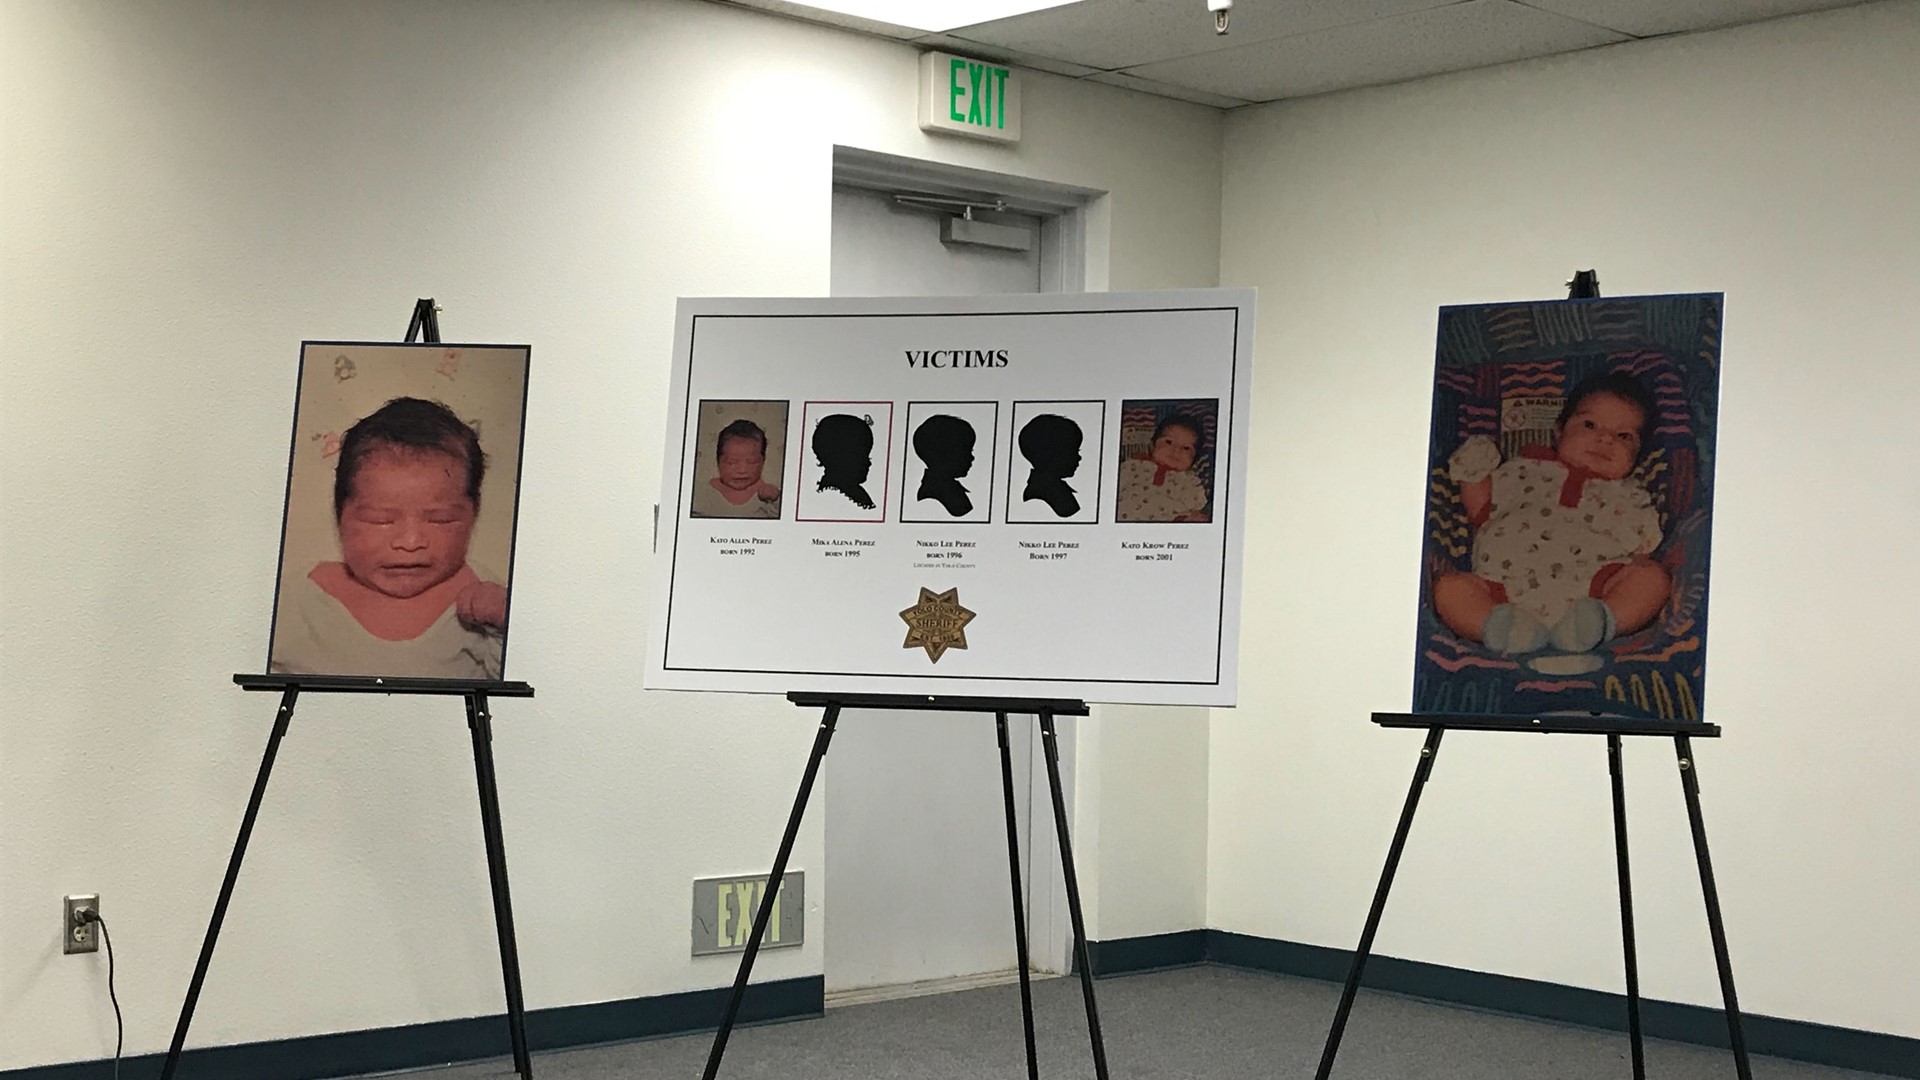 The Yolo County Sheriff's Office announced the arrest of Paul Perez, who has been charged with the deaths of his five infant children.